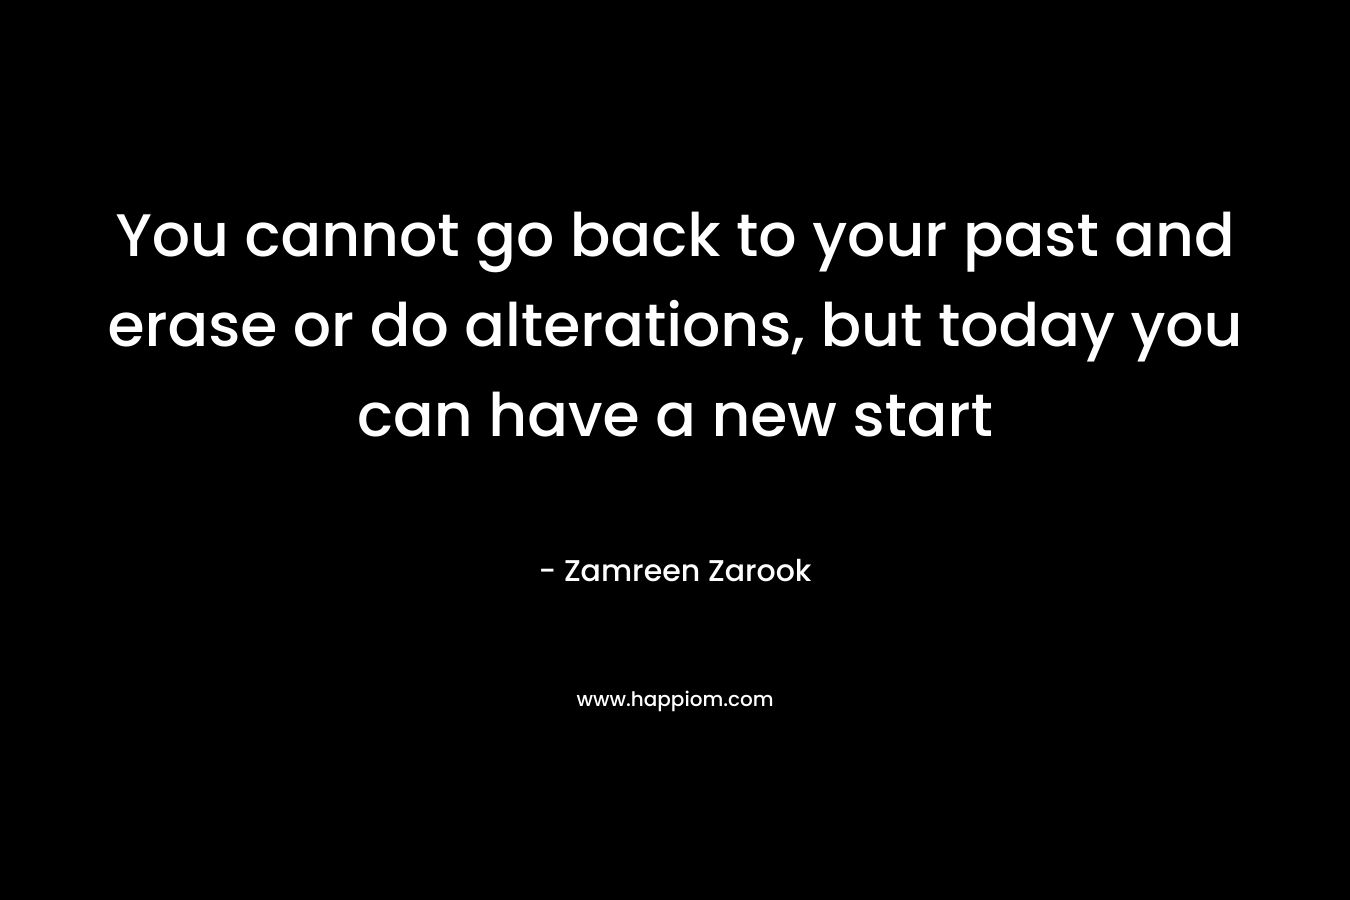 You cannot go back to your past and erase or do alterations, but today you can have a new start